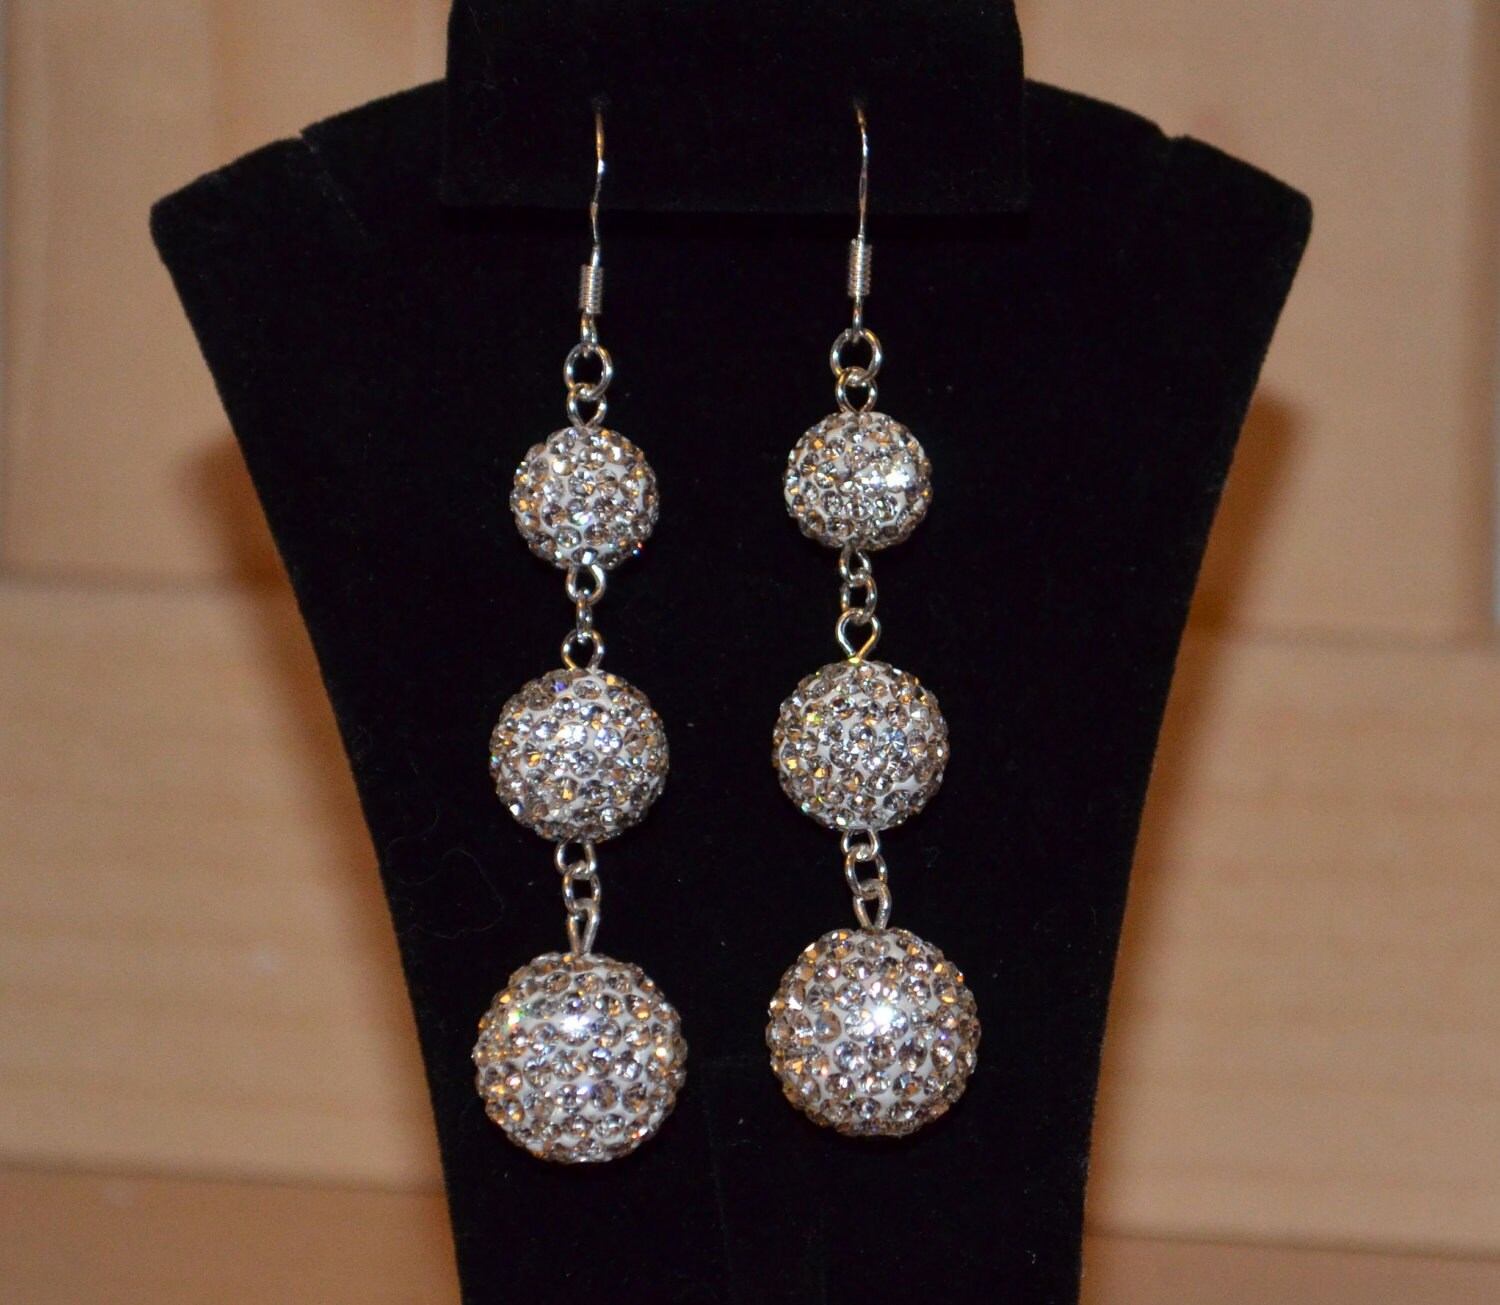 White Clear Rhinestone Crystal Pave Dangle Earrings 14mm - Etsy